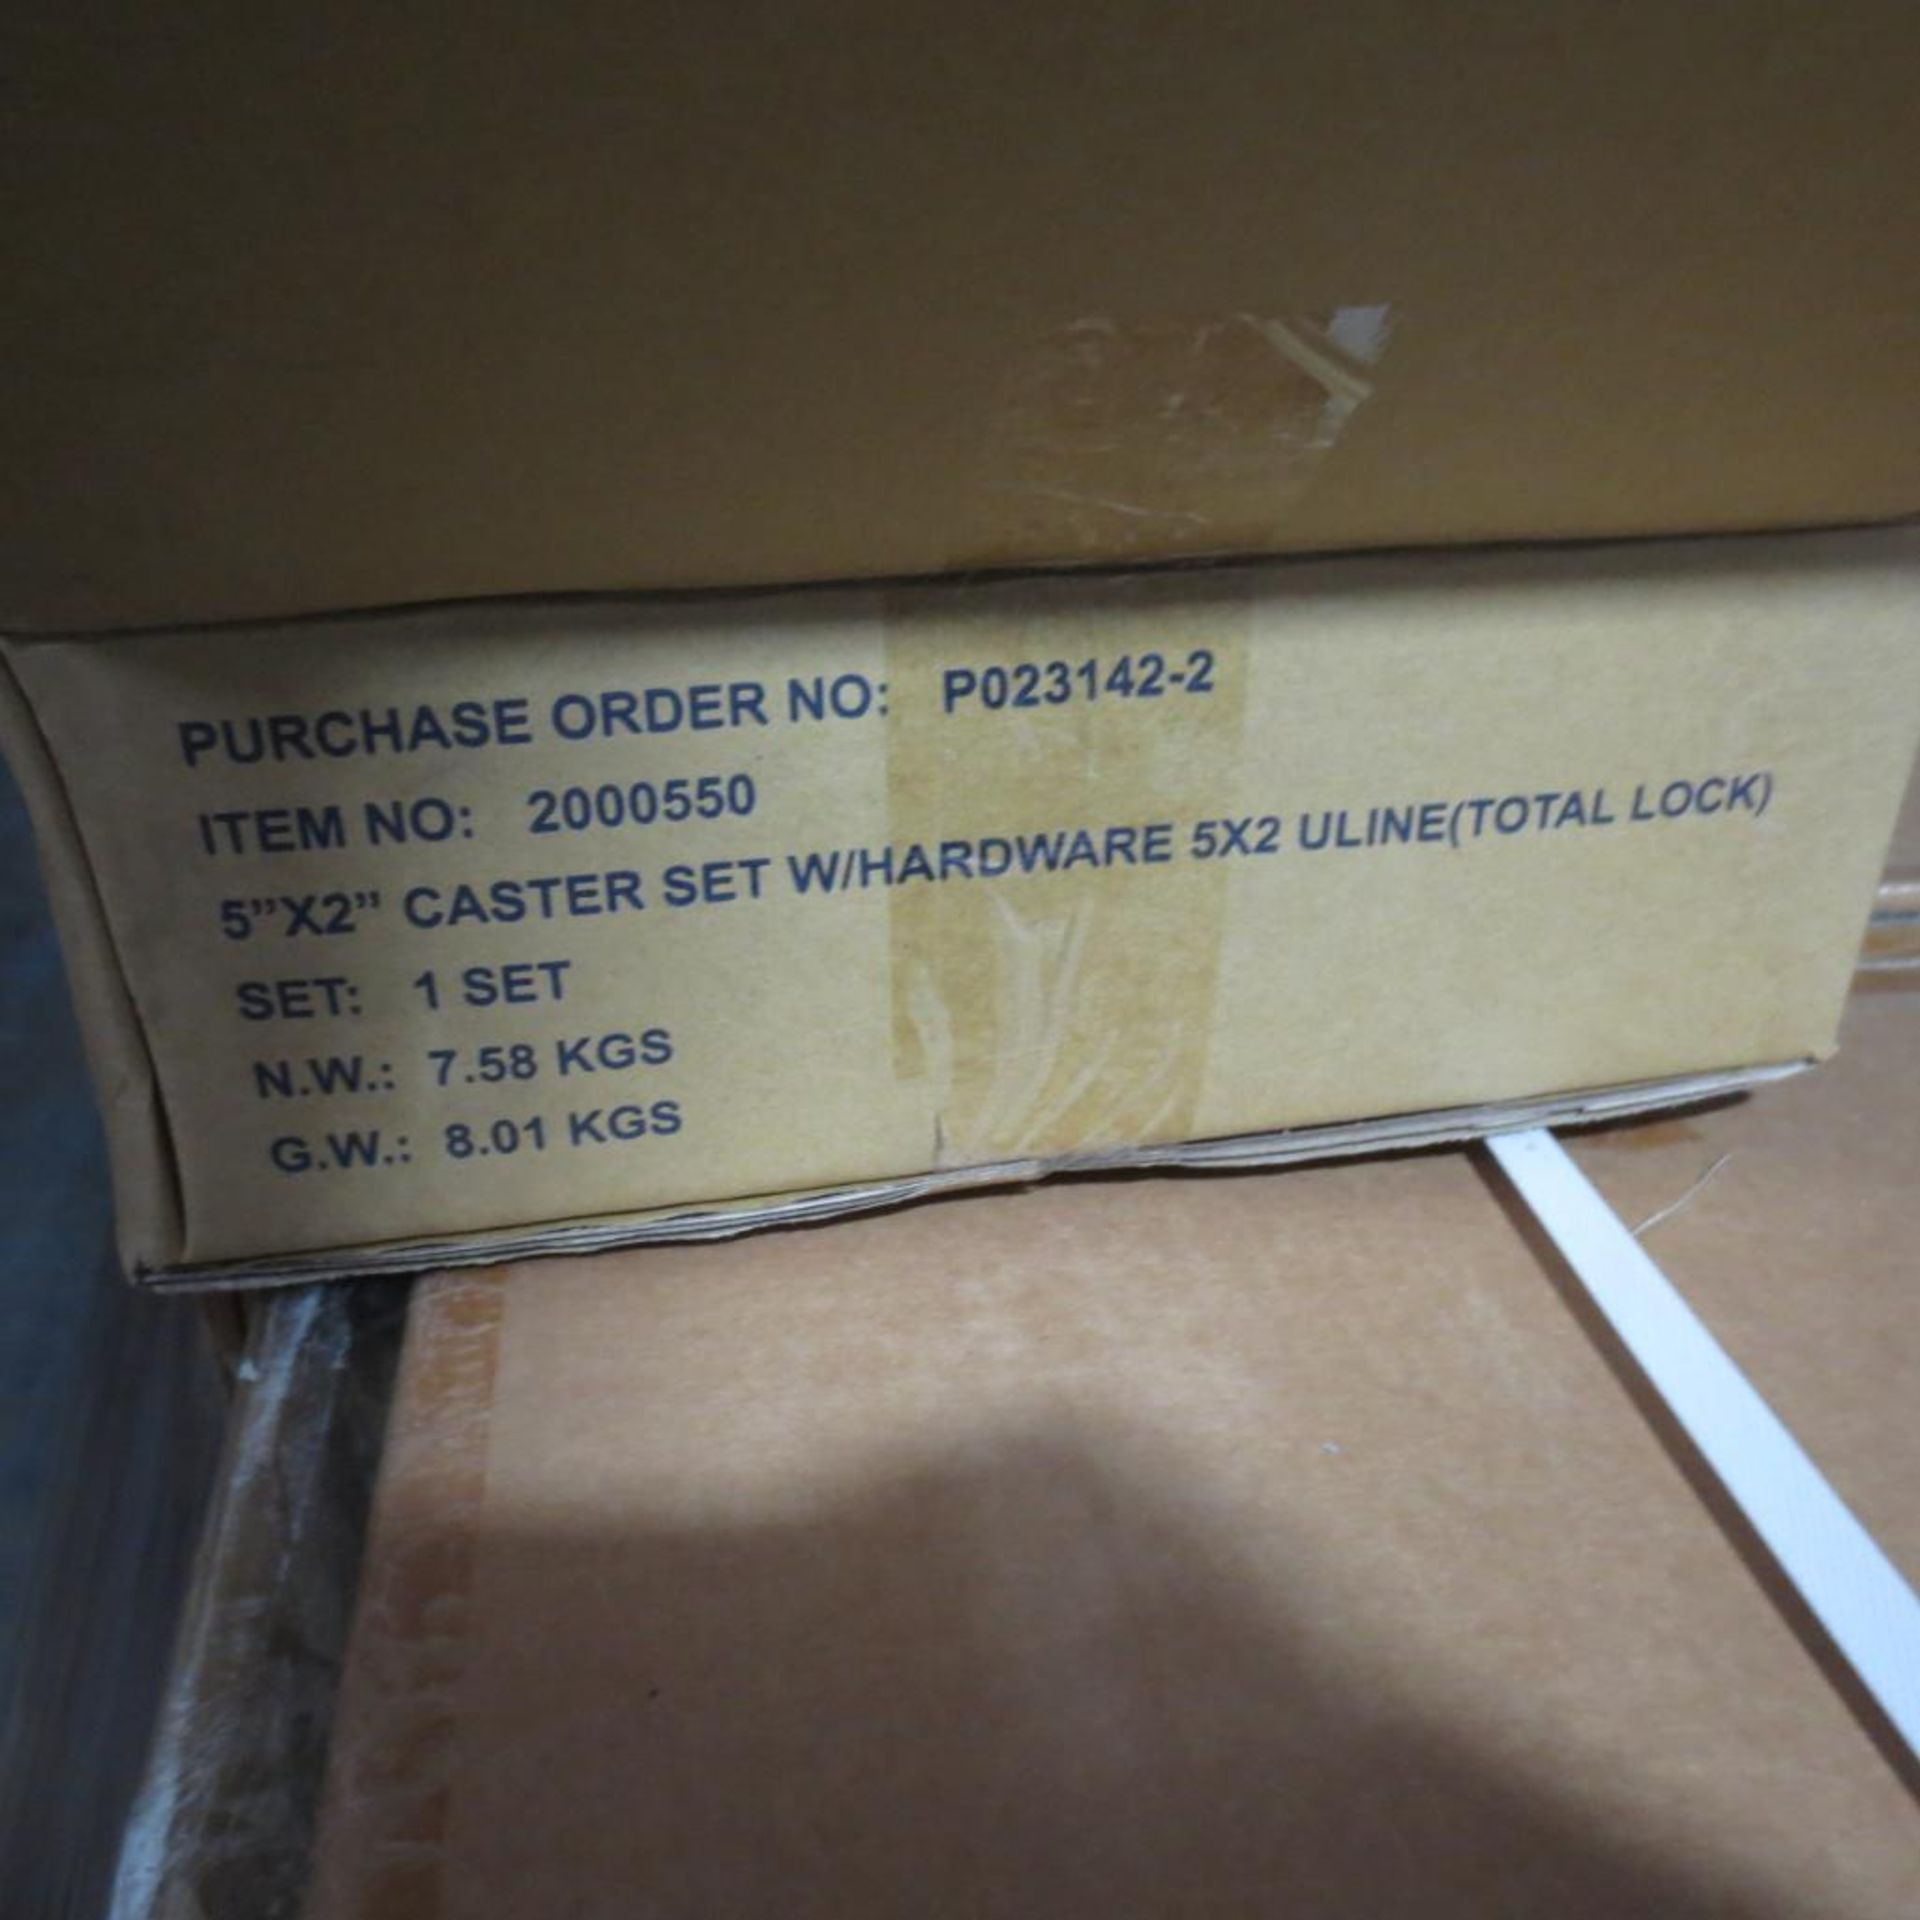 Appx. 135 Box of 1 Set of Casters 2000550 Loc North East by AB 24 - Image 2 of 3